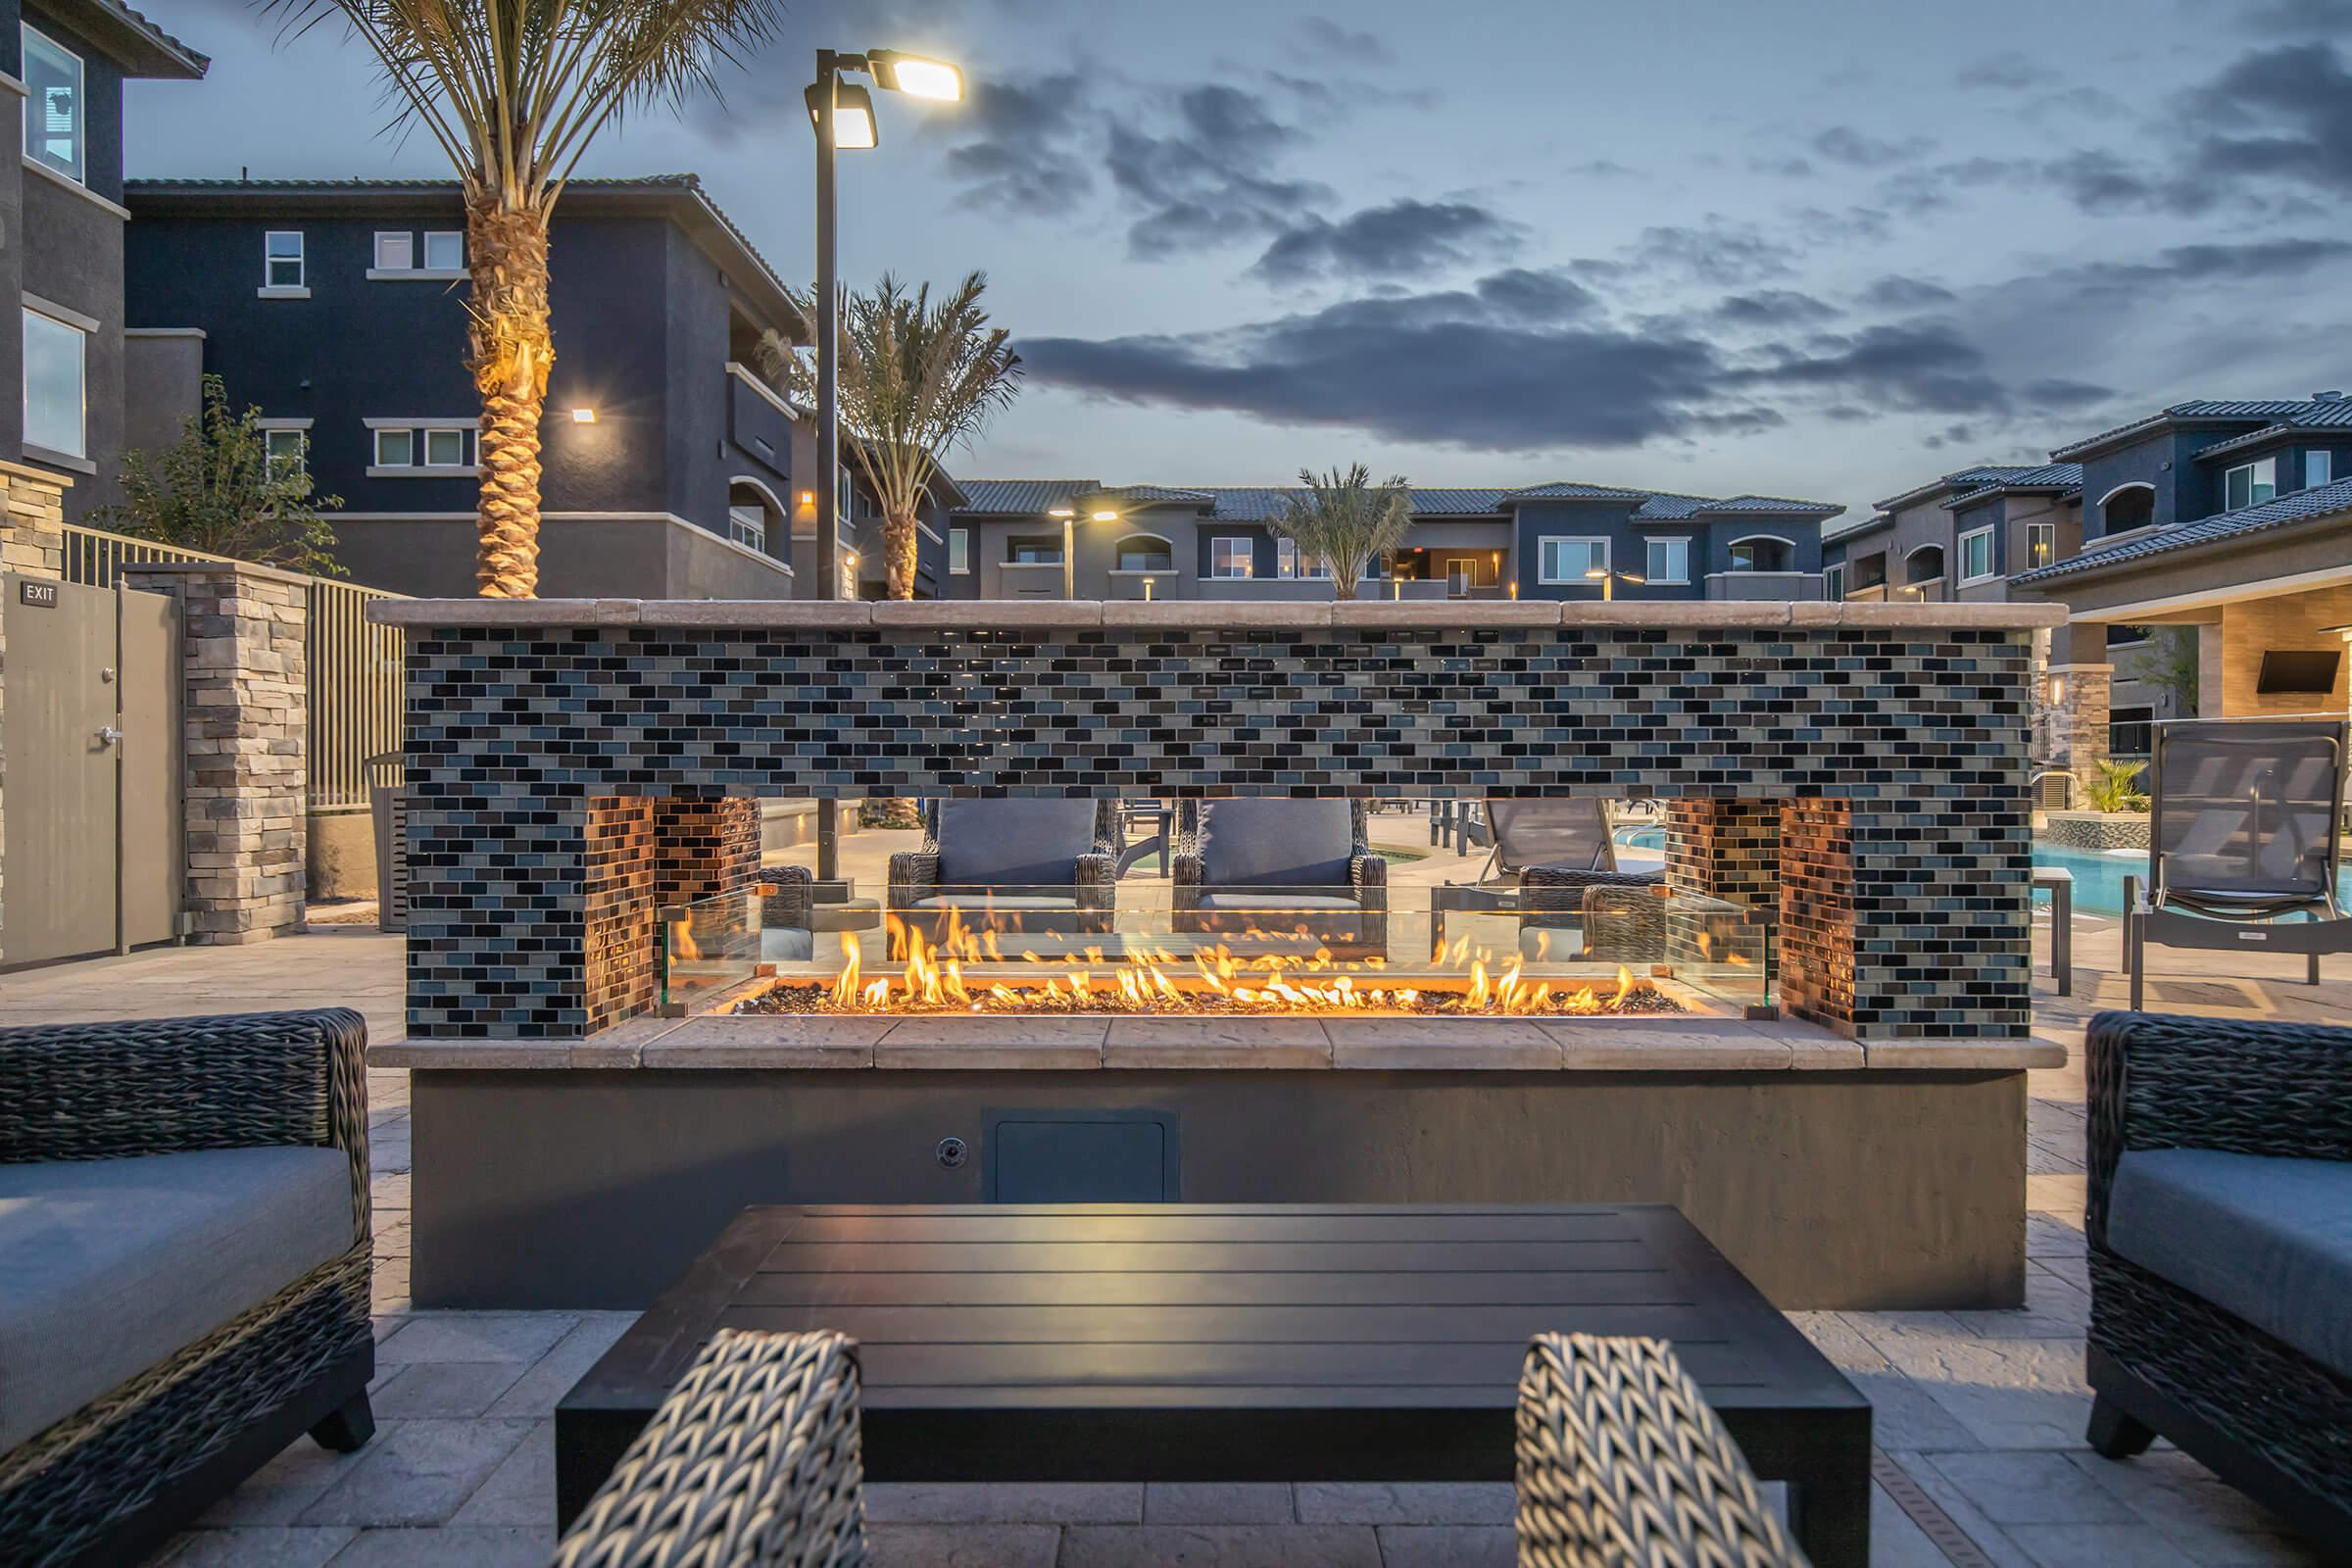 Lit outdoor fireplace with mosaic tiles